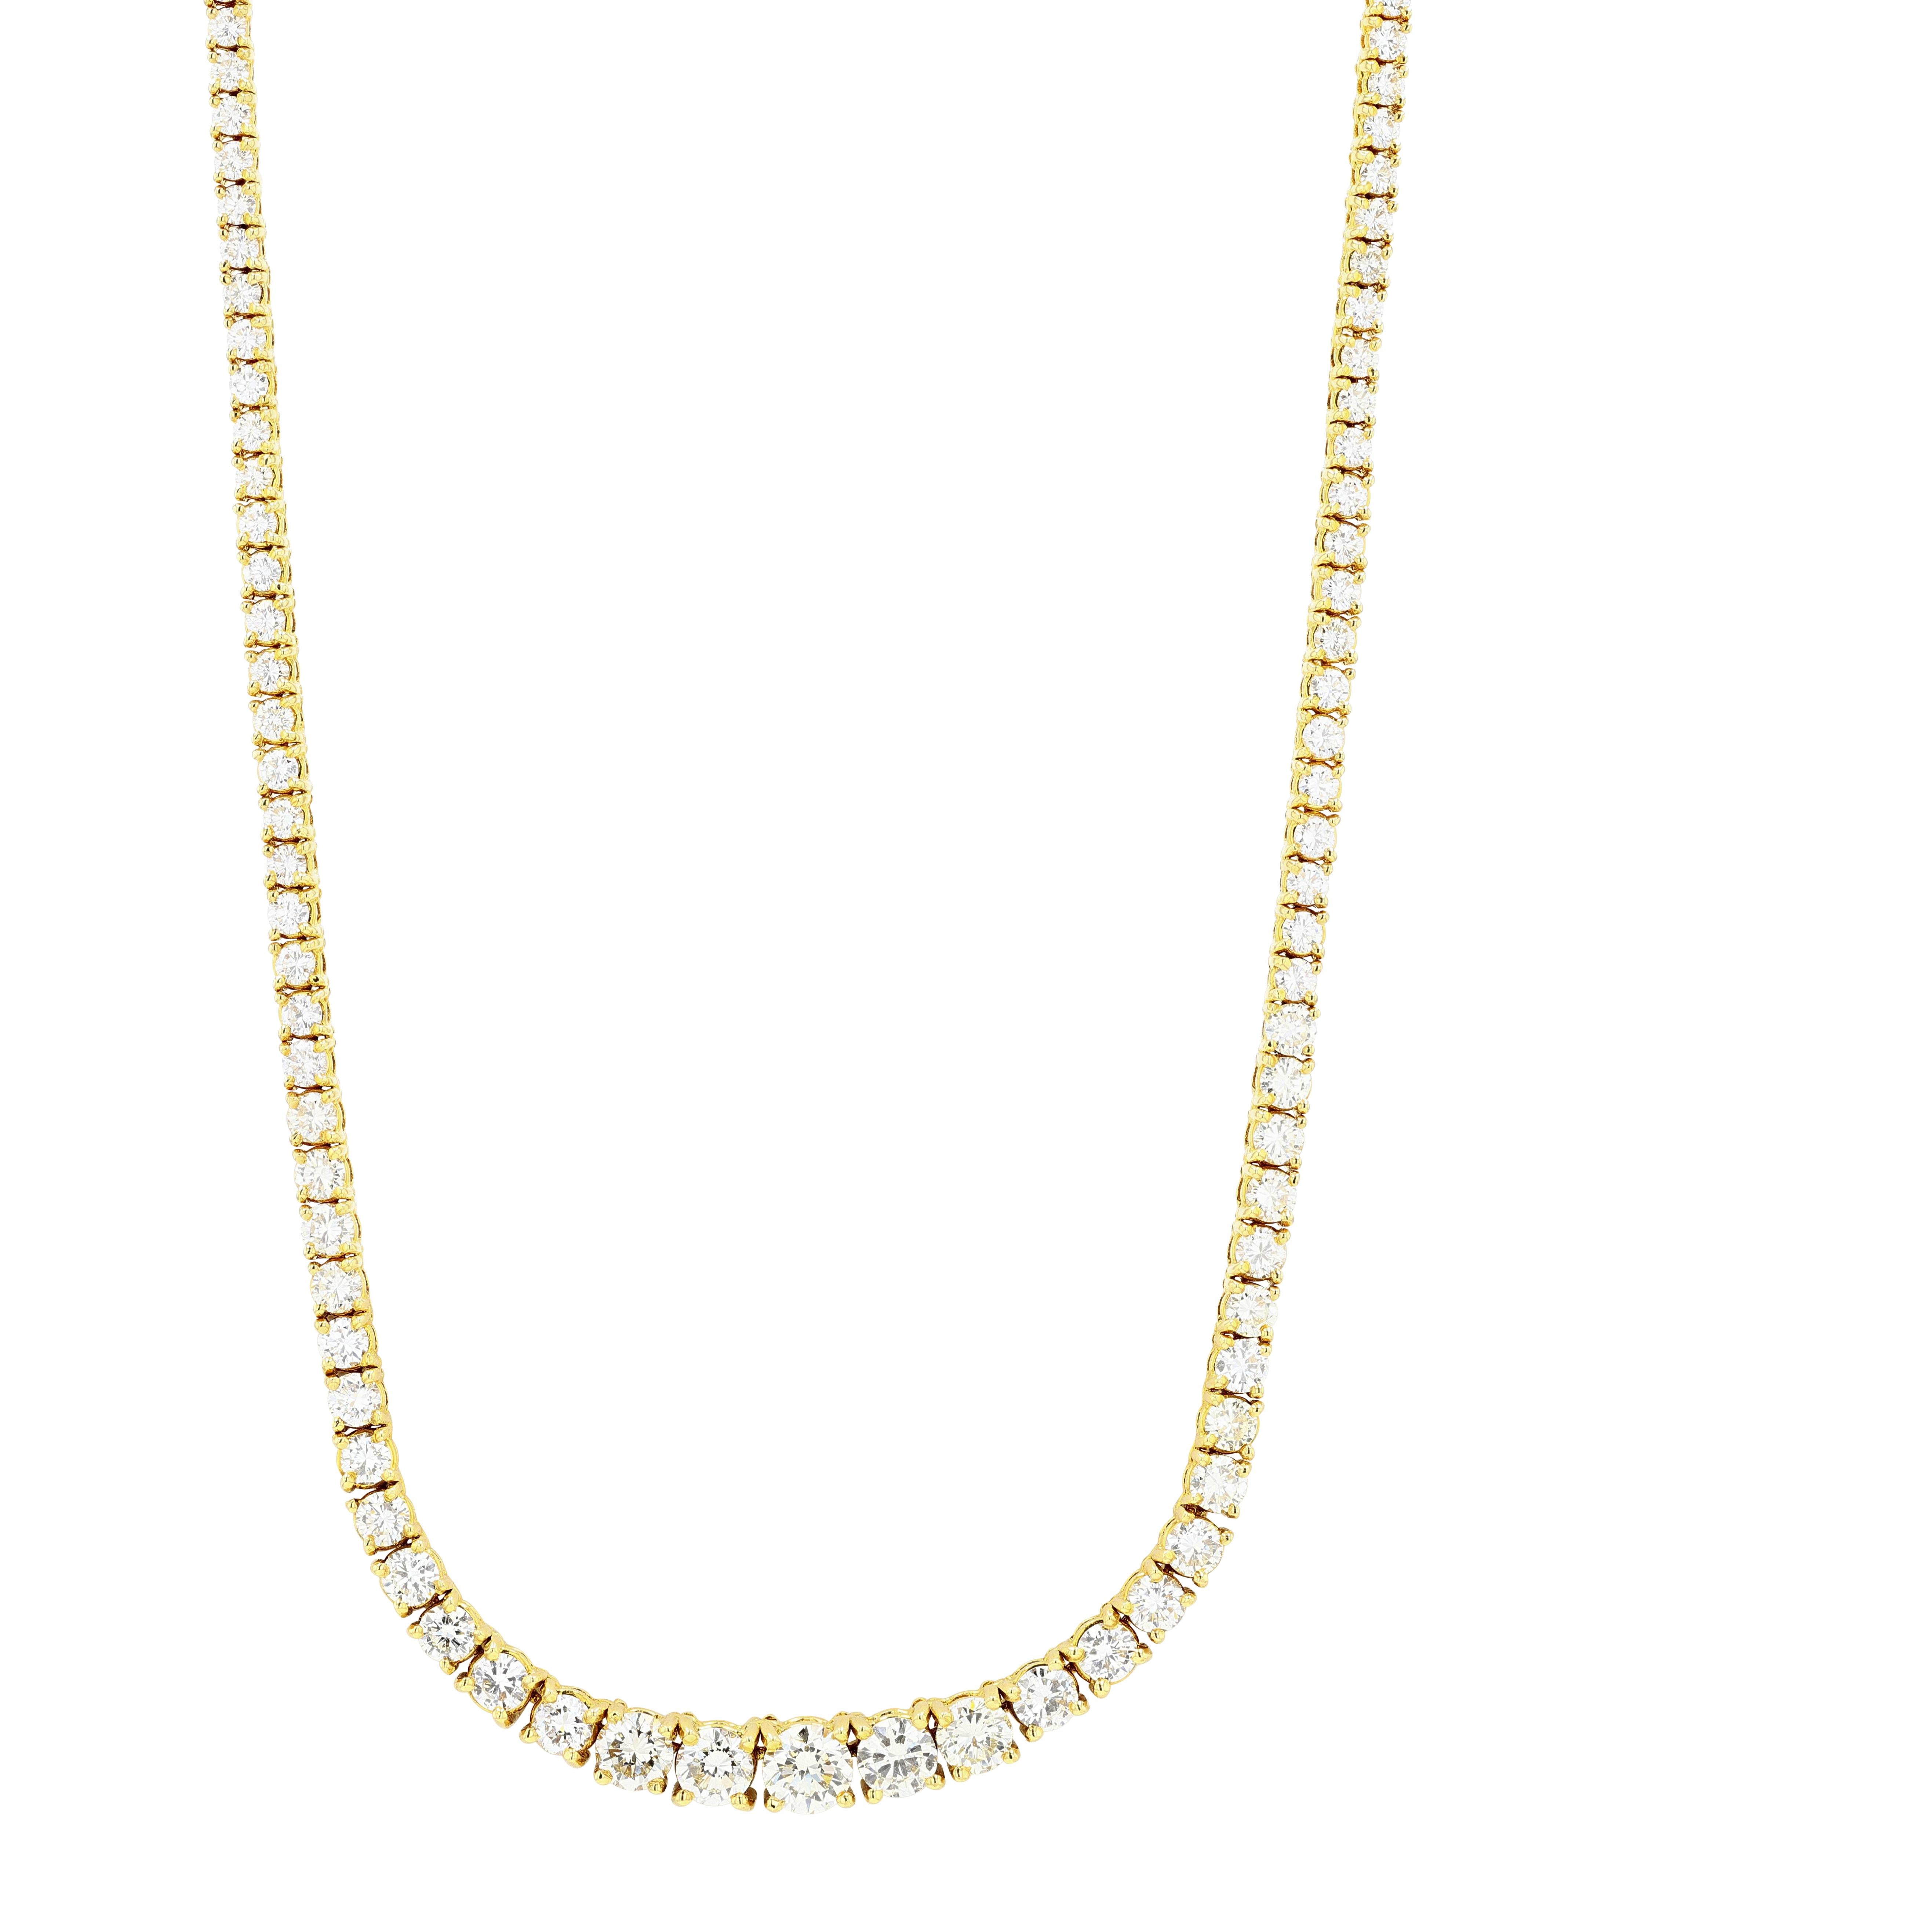 18k Yellow Gold 15.17 Carat Graduated Riviera Diamond Necklace In Excellent Condition For Sale In Princeton, NJ